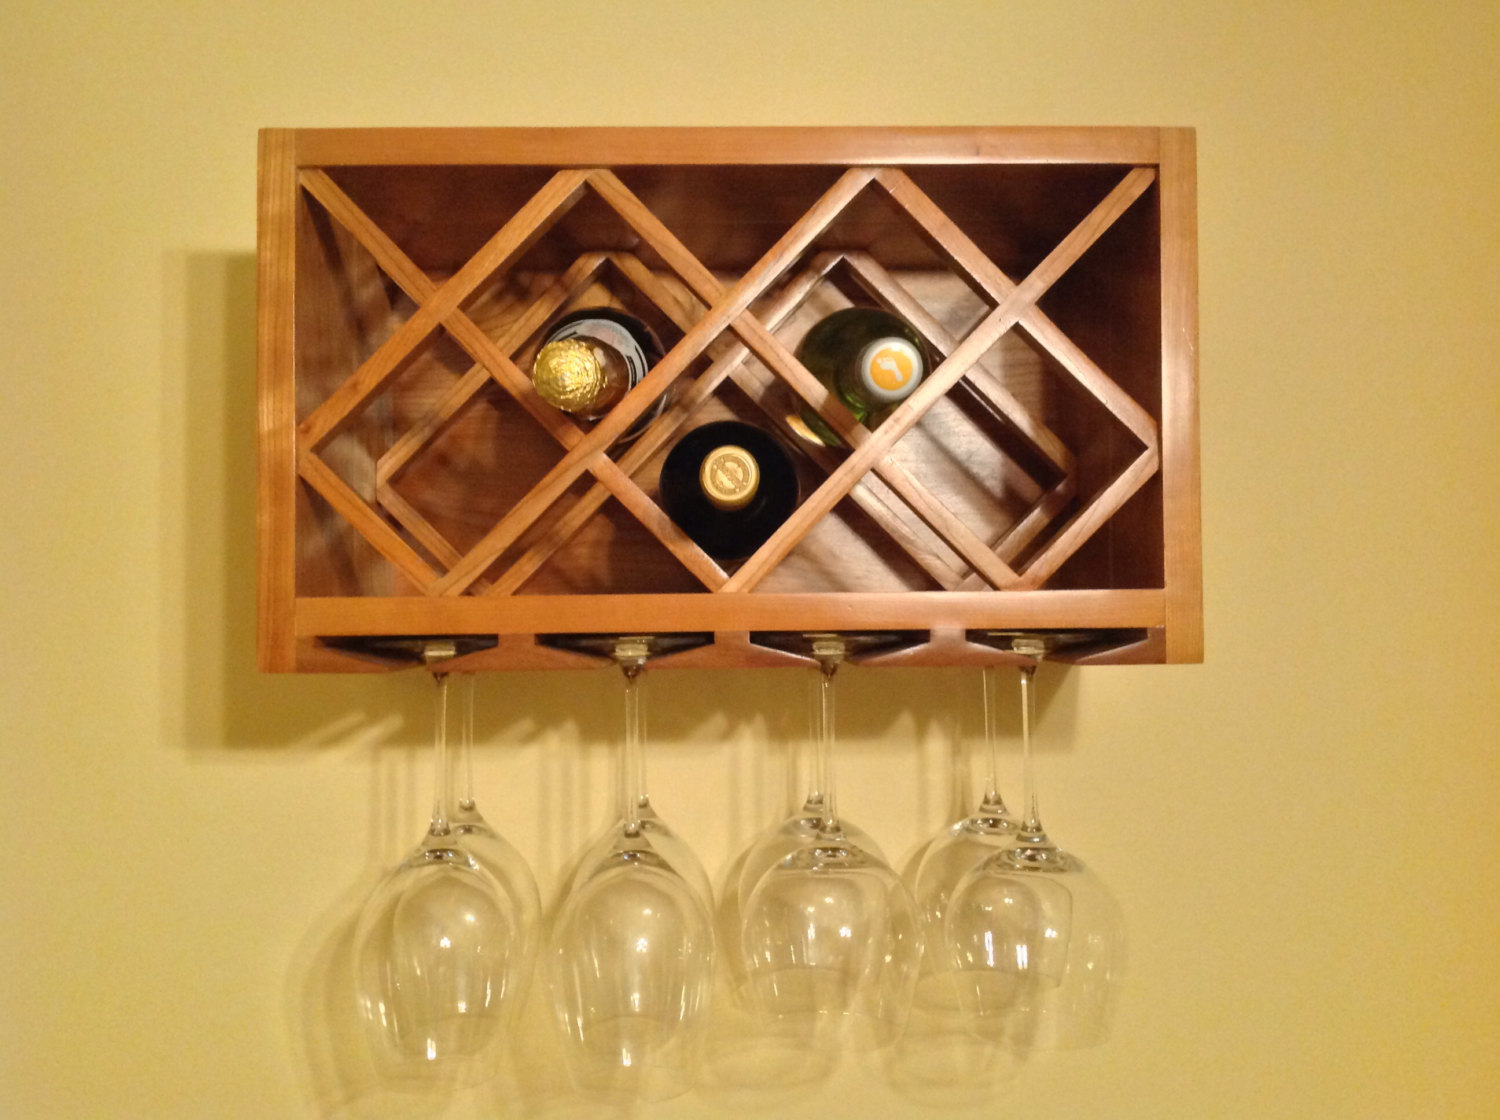 20 Wine Glasses and Barware Fits 5 Bottles Atterstone Double Wall Mounted Wine Rack Shelf with Hanging Glass Stem Holder 